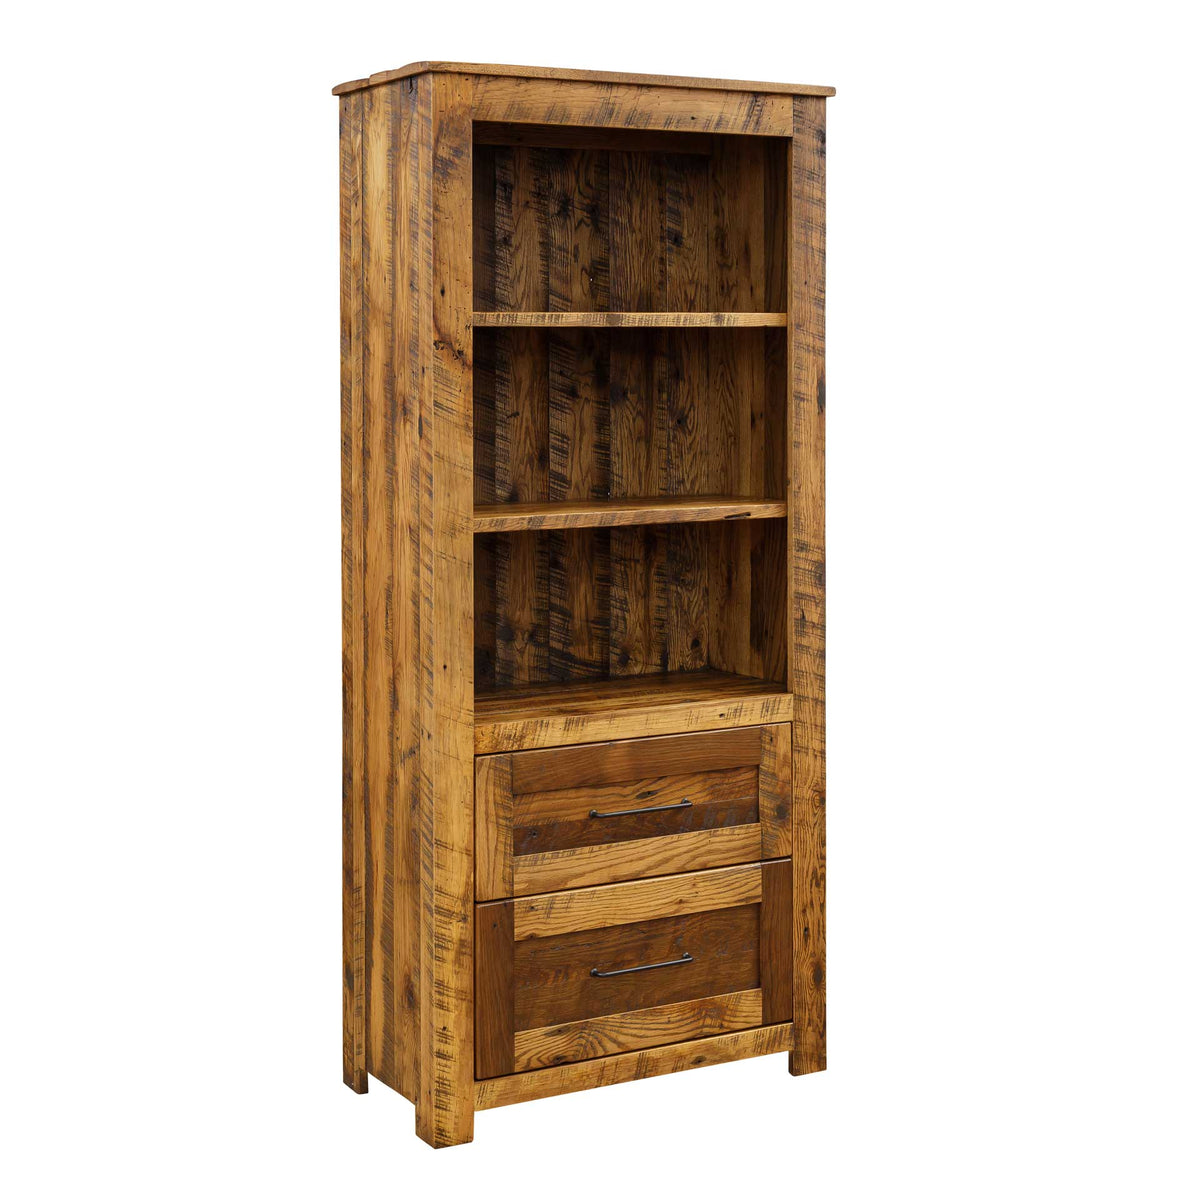 Urban Lodge Barnwood Bookcase with Drawers - snyders.furniture